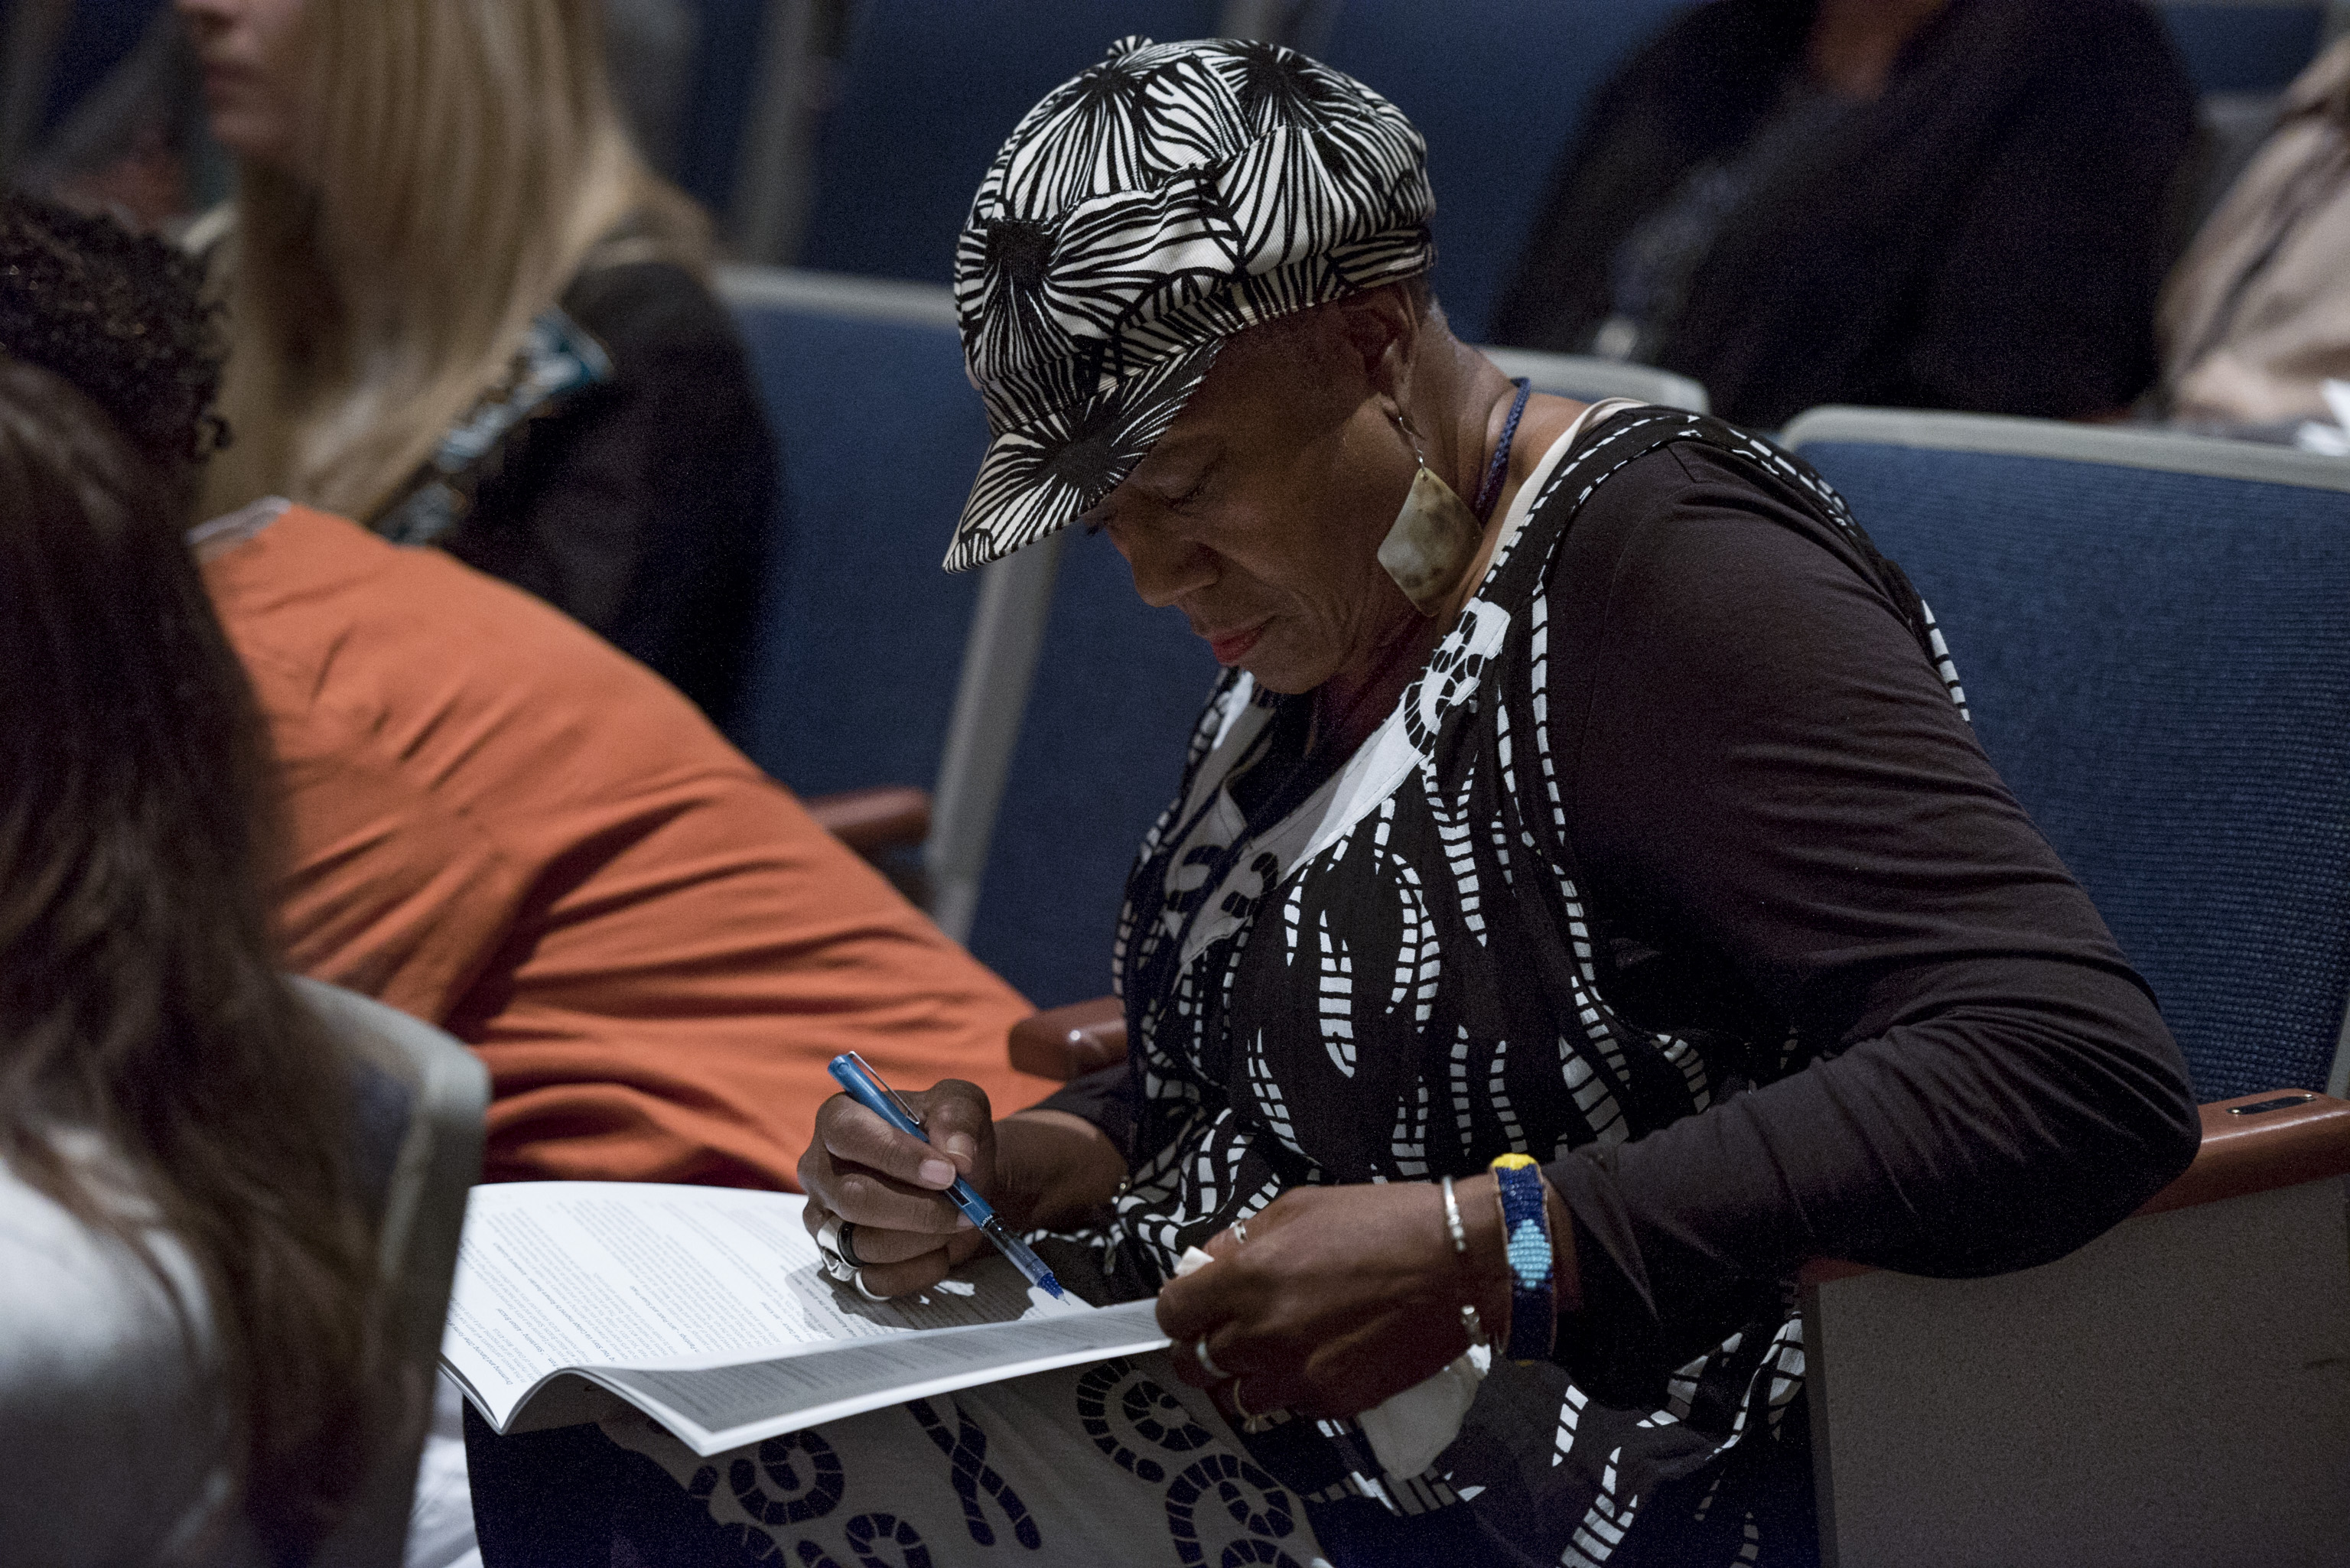 Collective Impact attendee taking notes at the conference